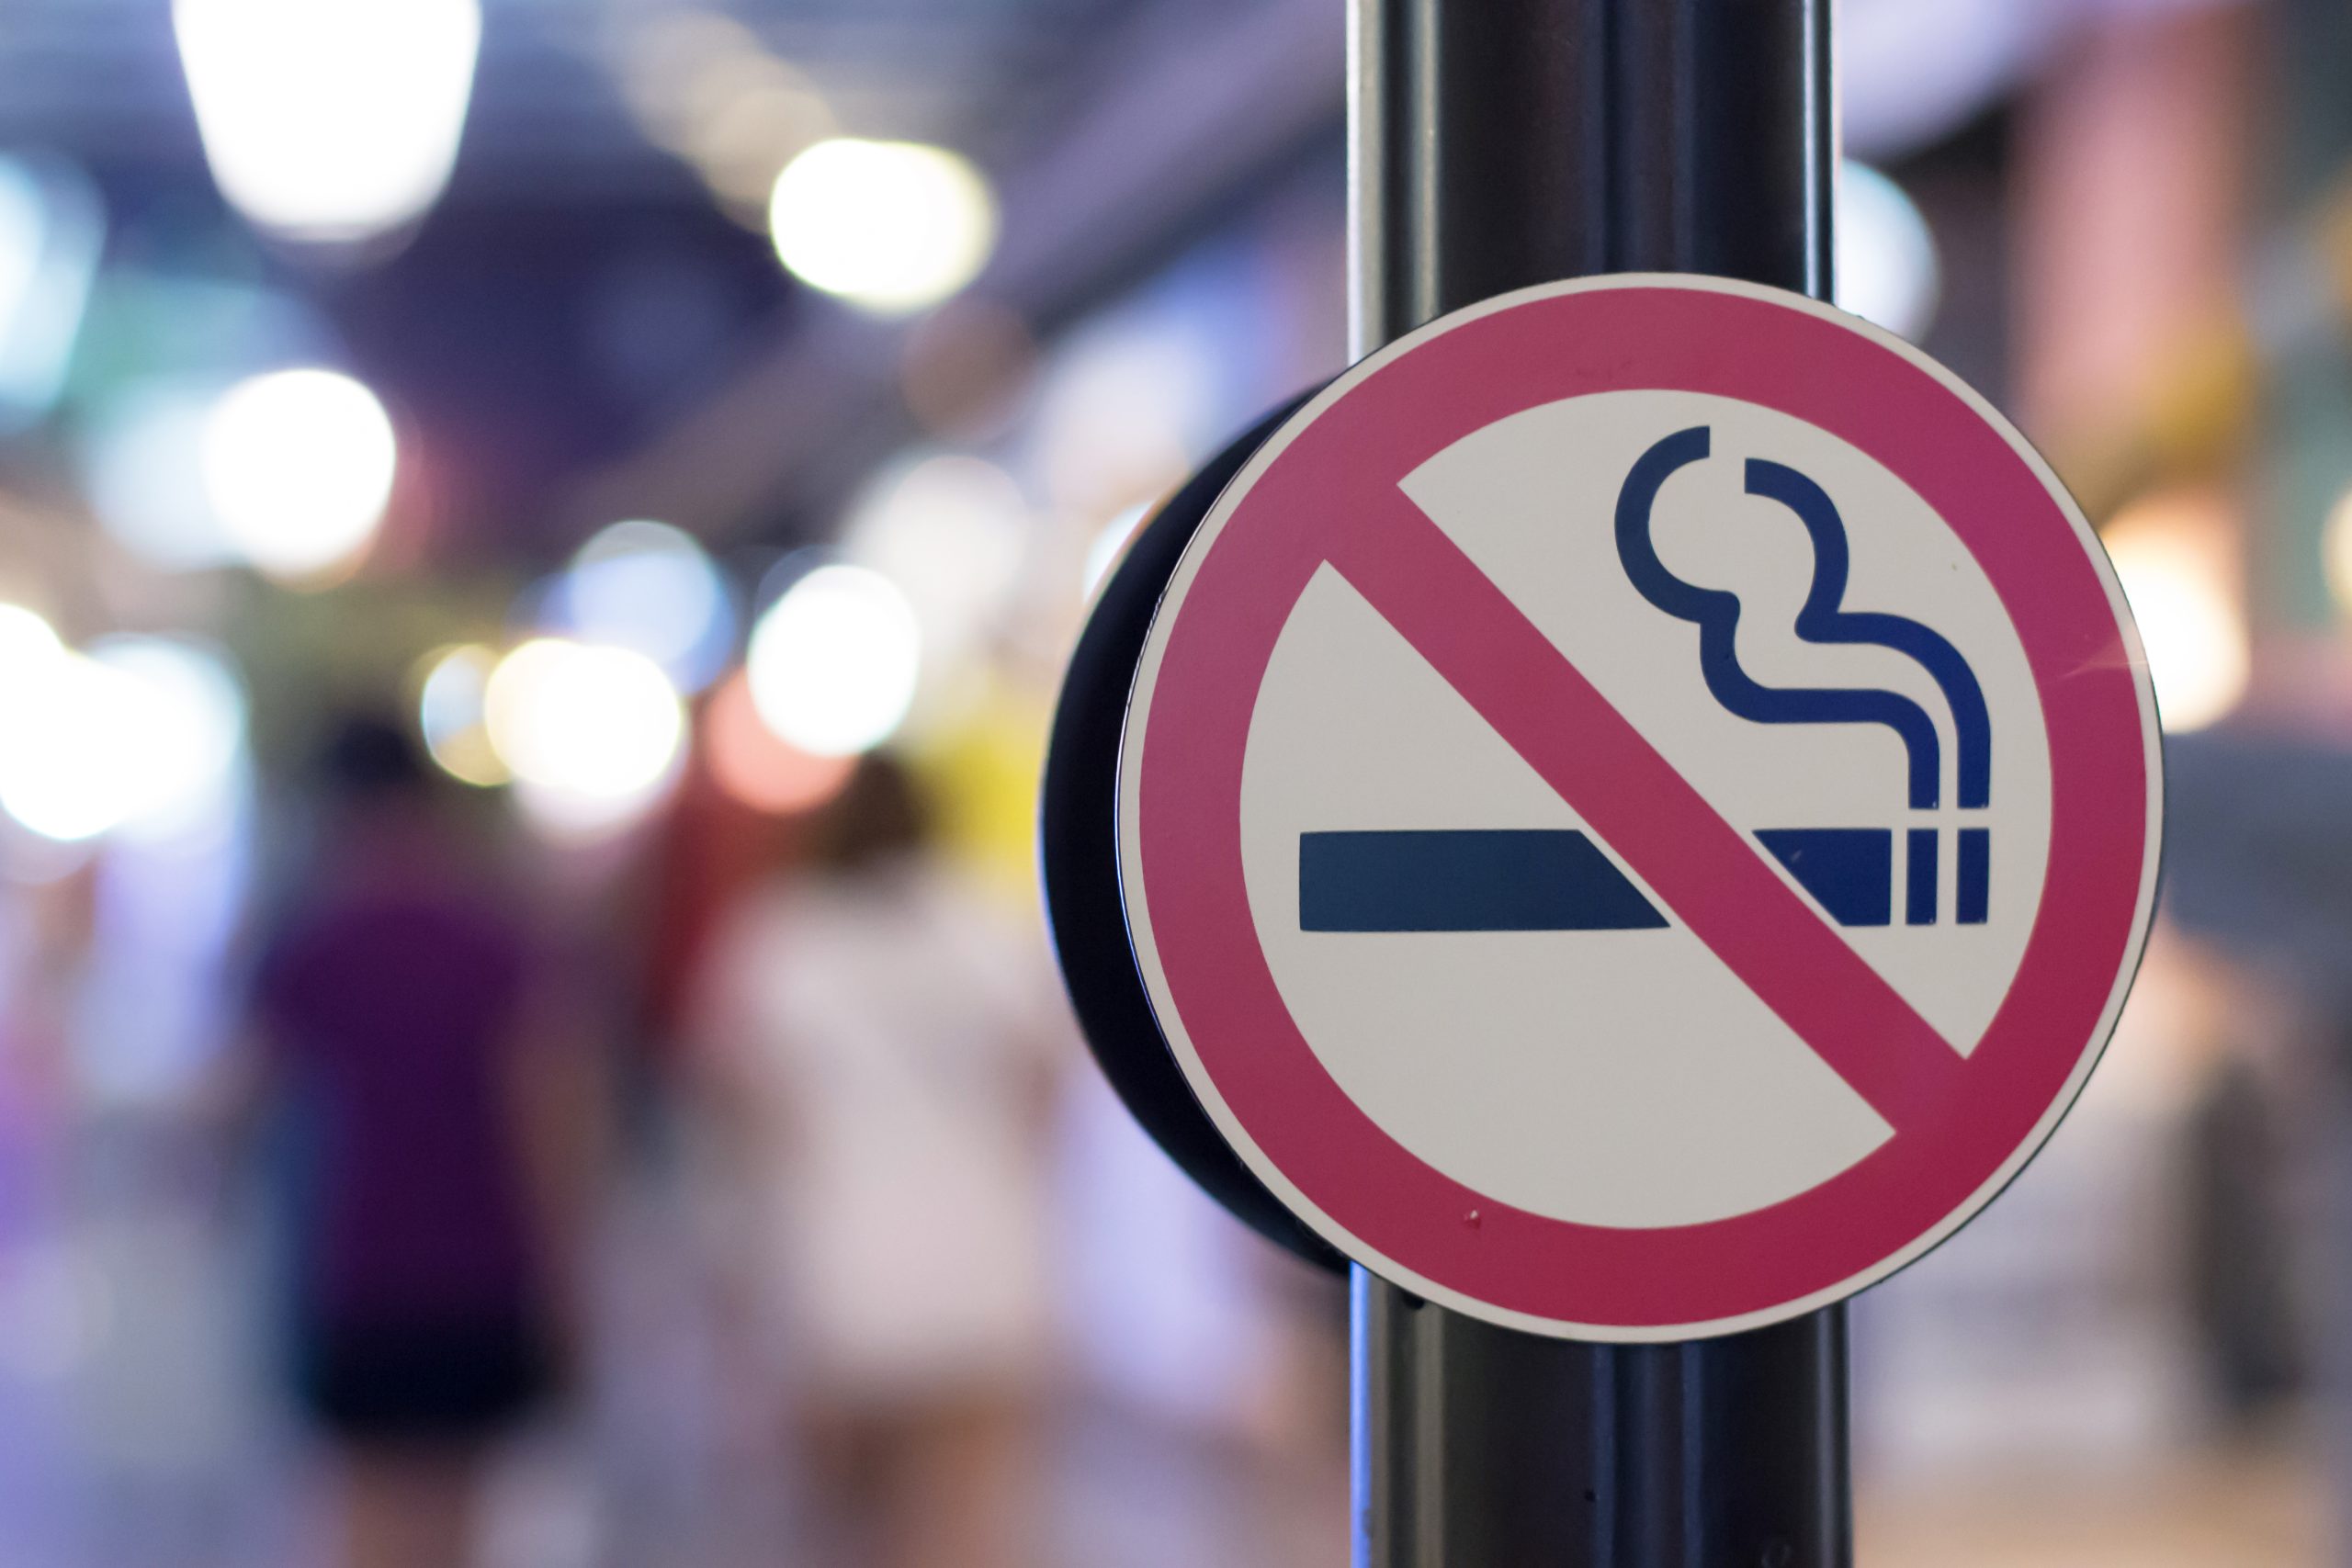 Consultation on generational smoking ban set to conclude